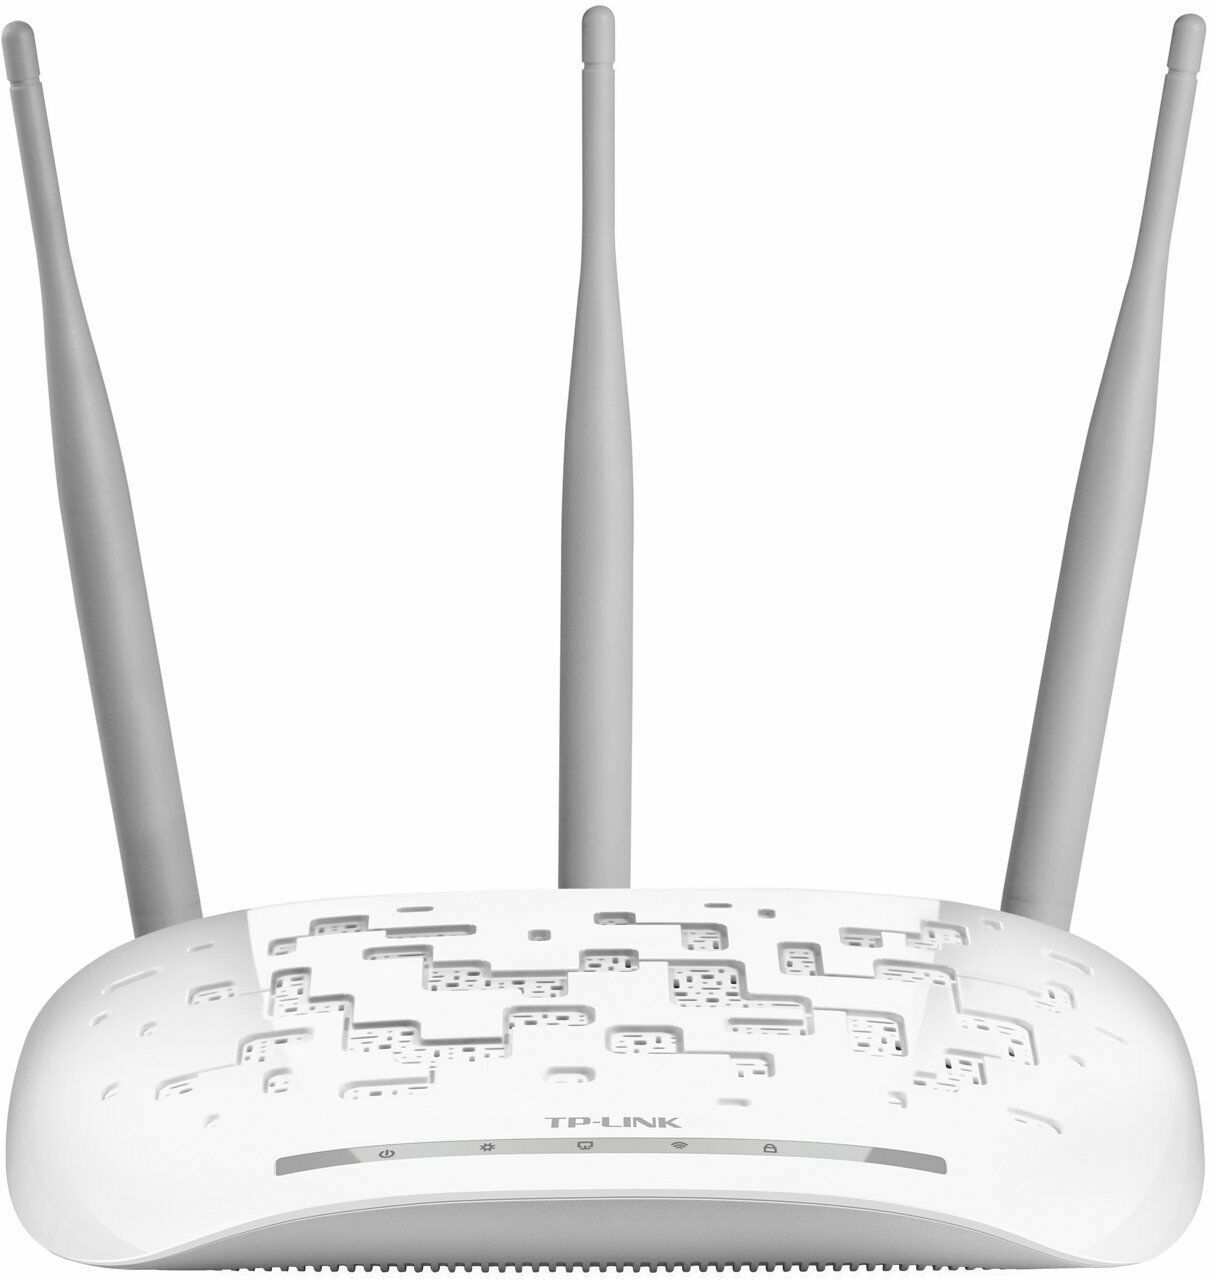 TP-Link Network TL-WA901ND 300Mbps Wireless N Access Point Retail